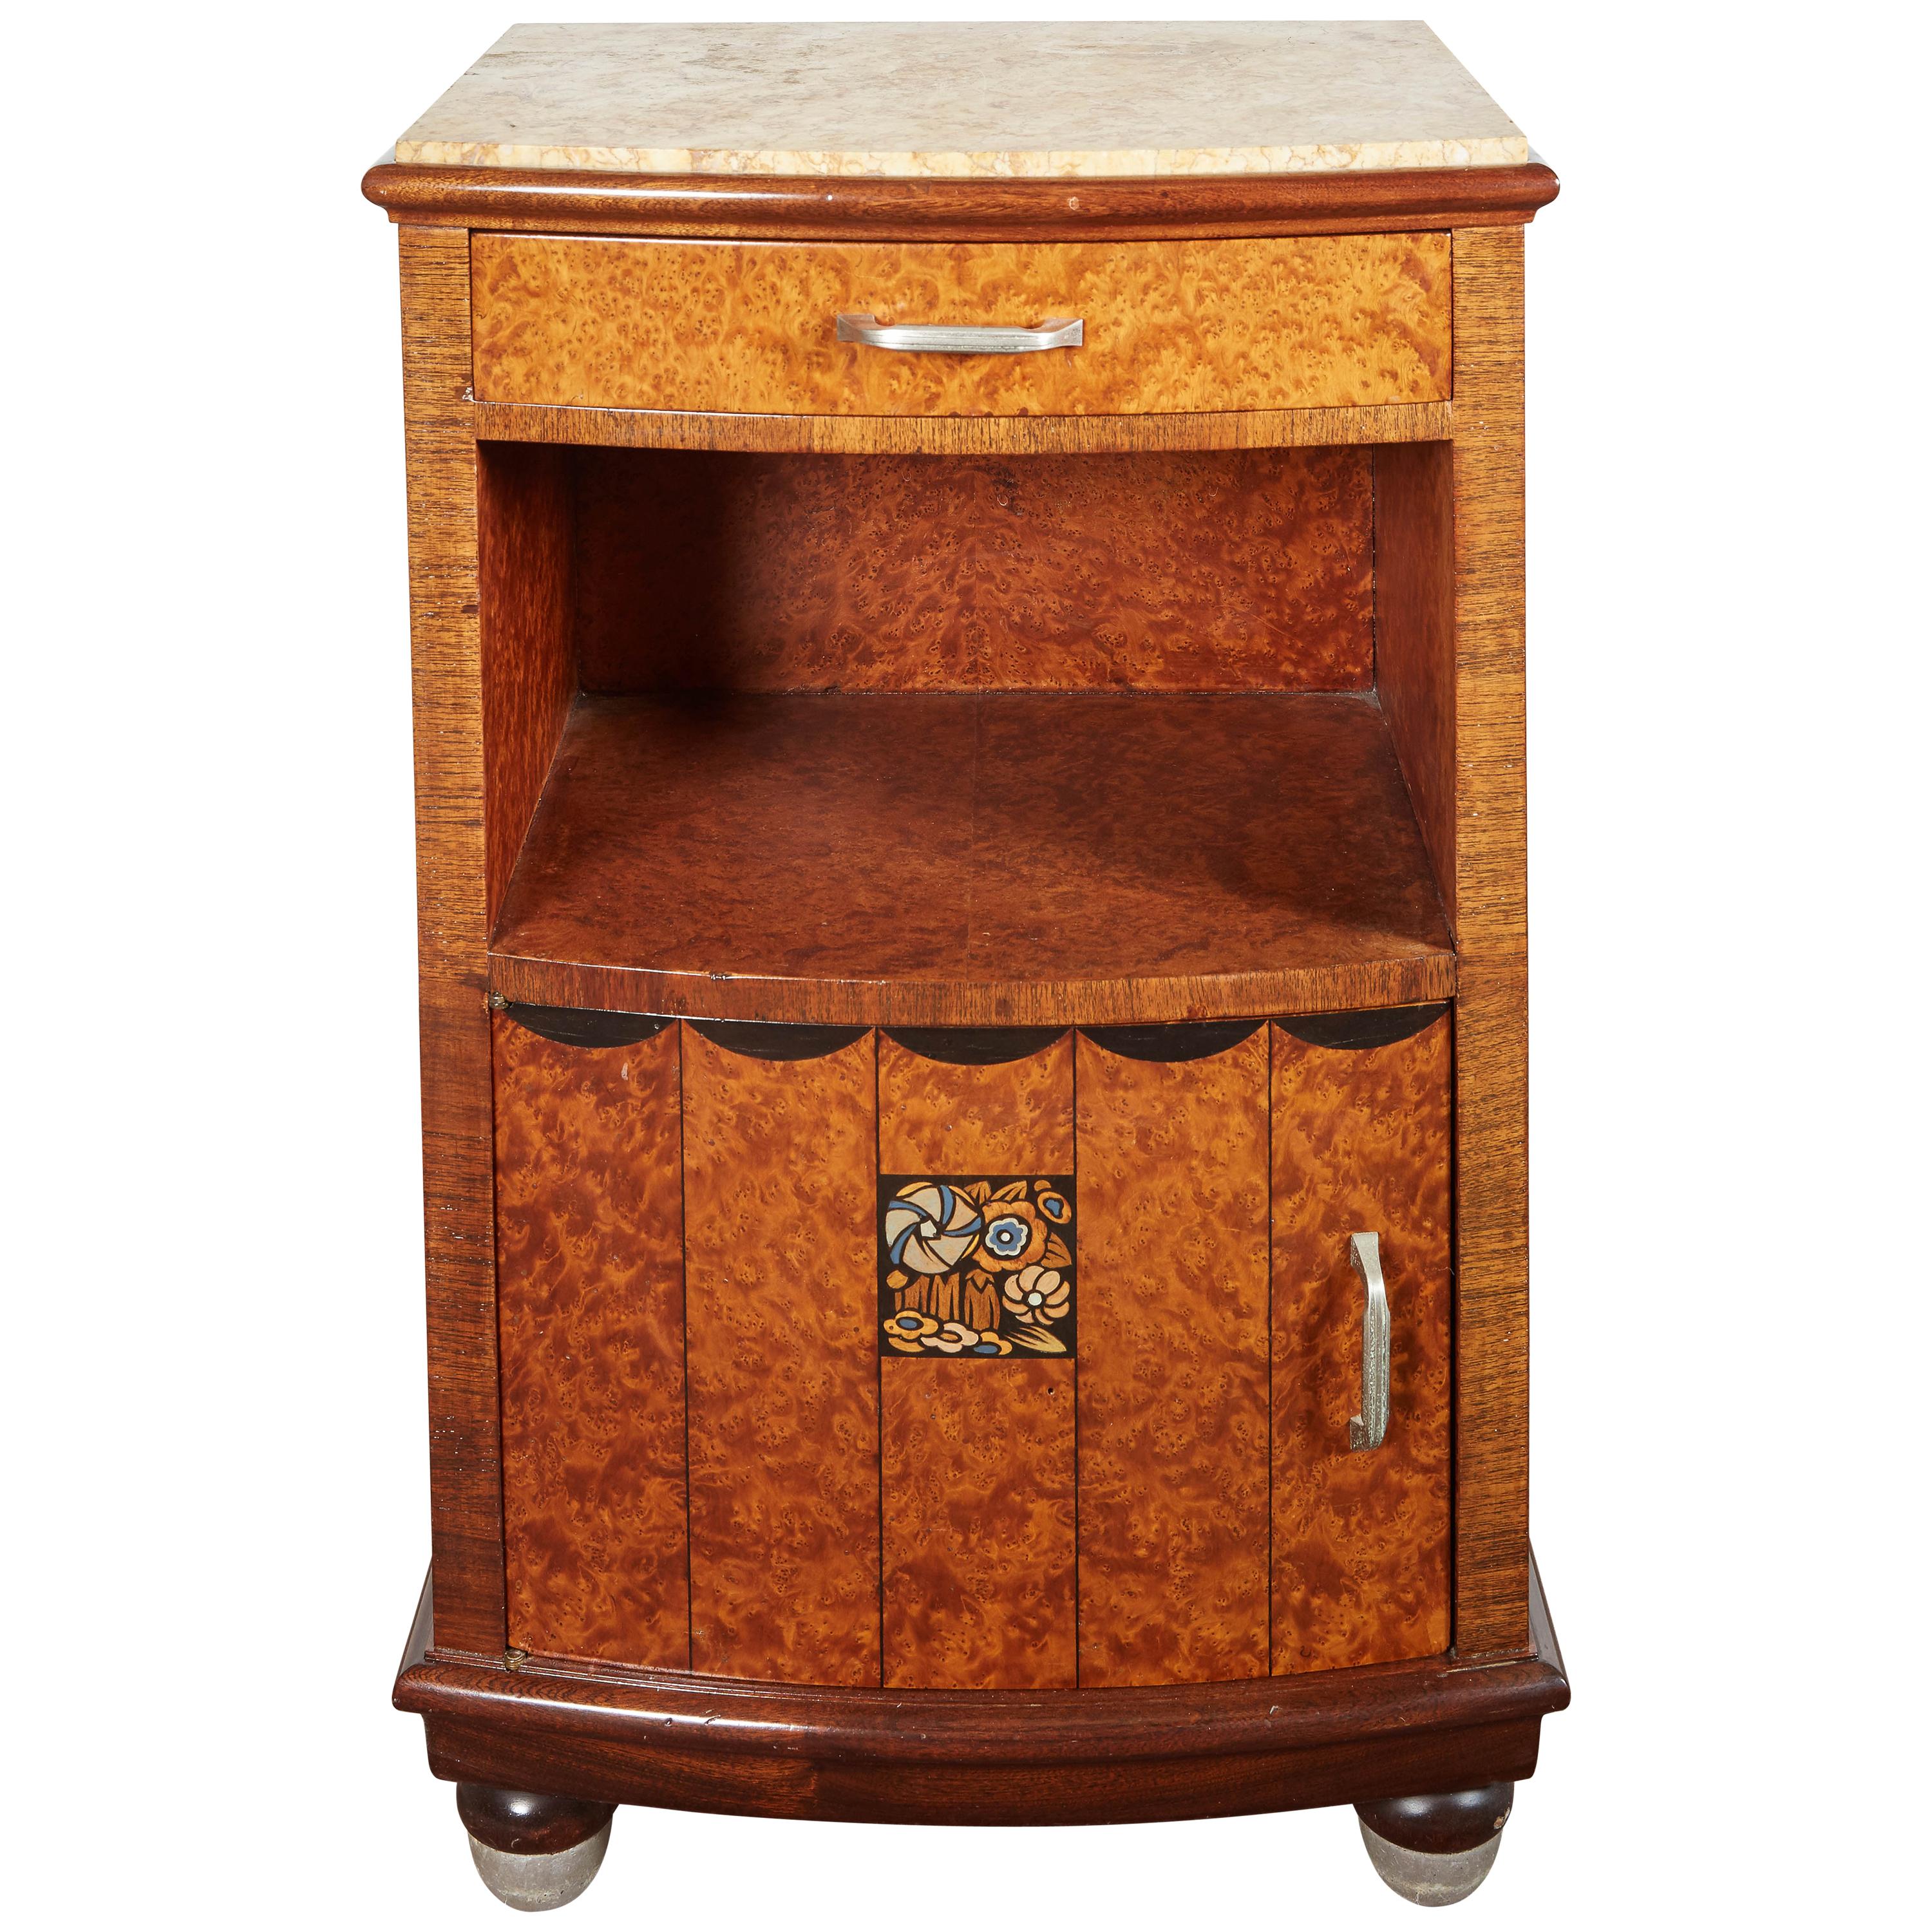 A pair of fully figured thuya wood, marquetry inlaid end tables having original veined marble tops in light yellow, burnt umber and ochre.
The spacious top drawer sits atop an open space above a single door with fitted marble interior, while raised